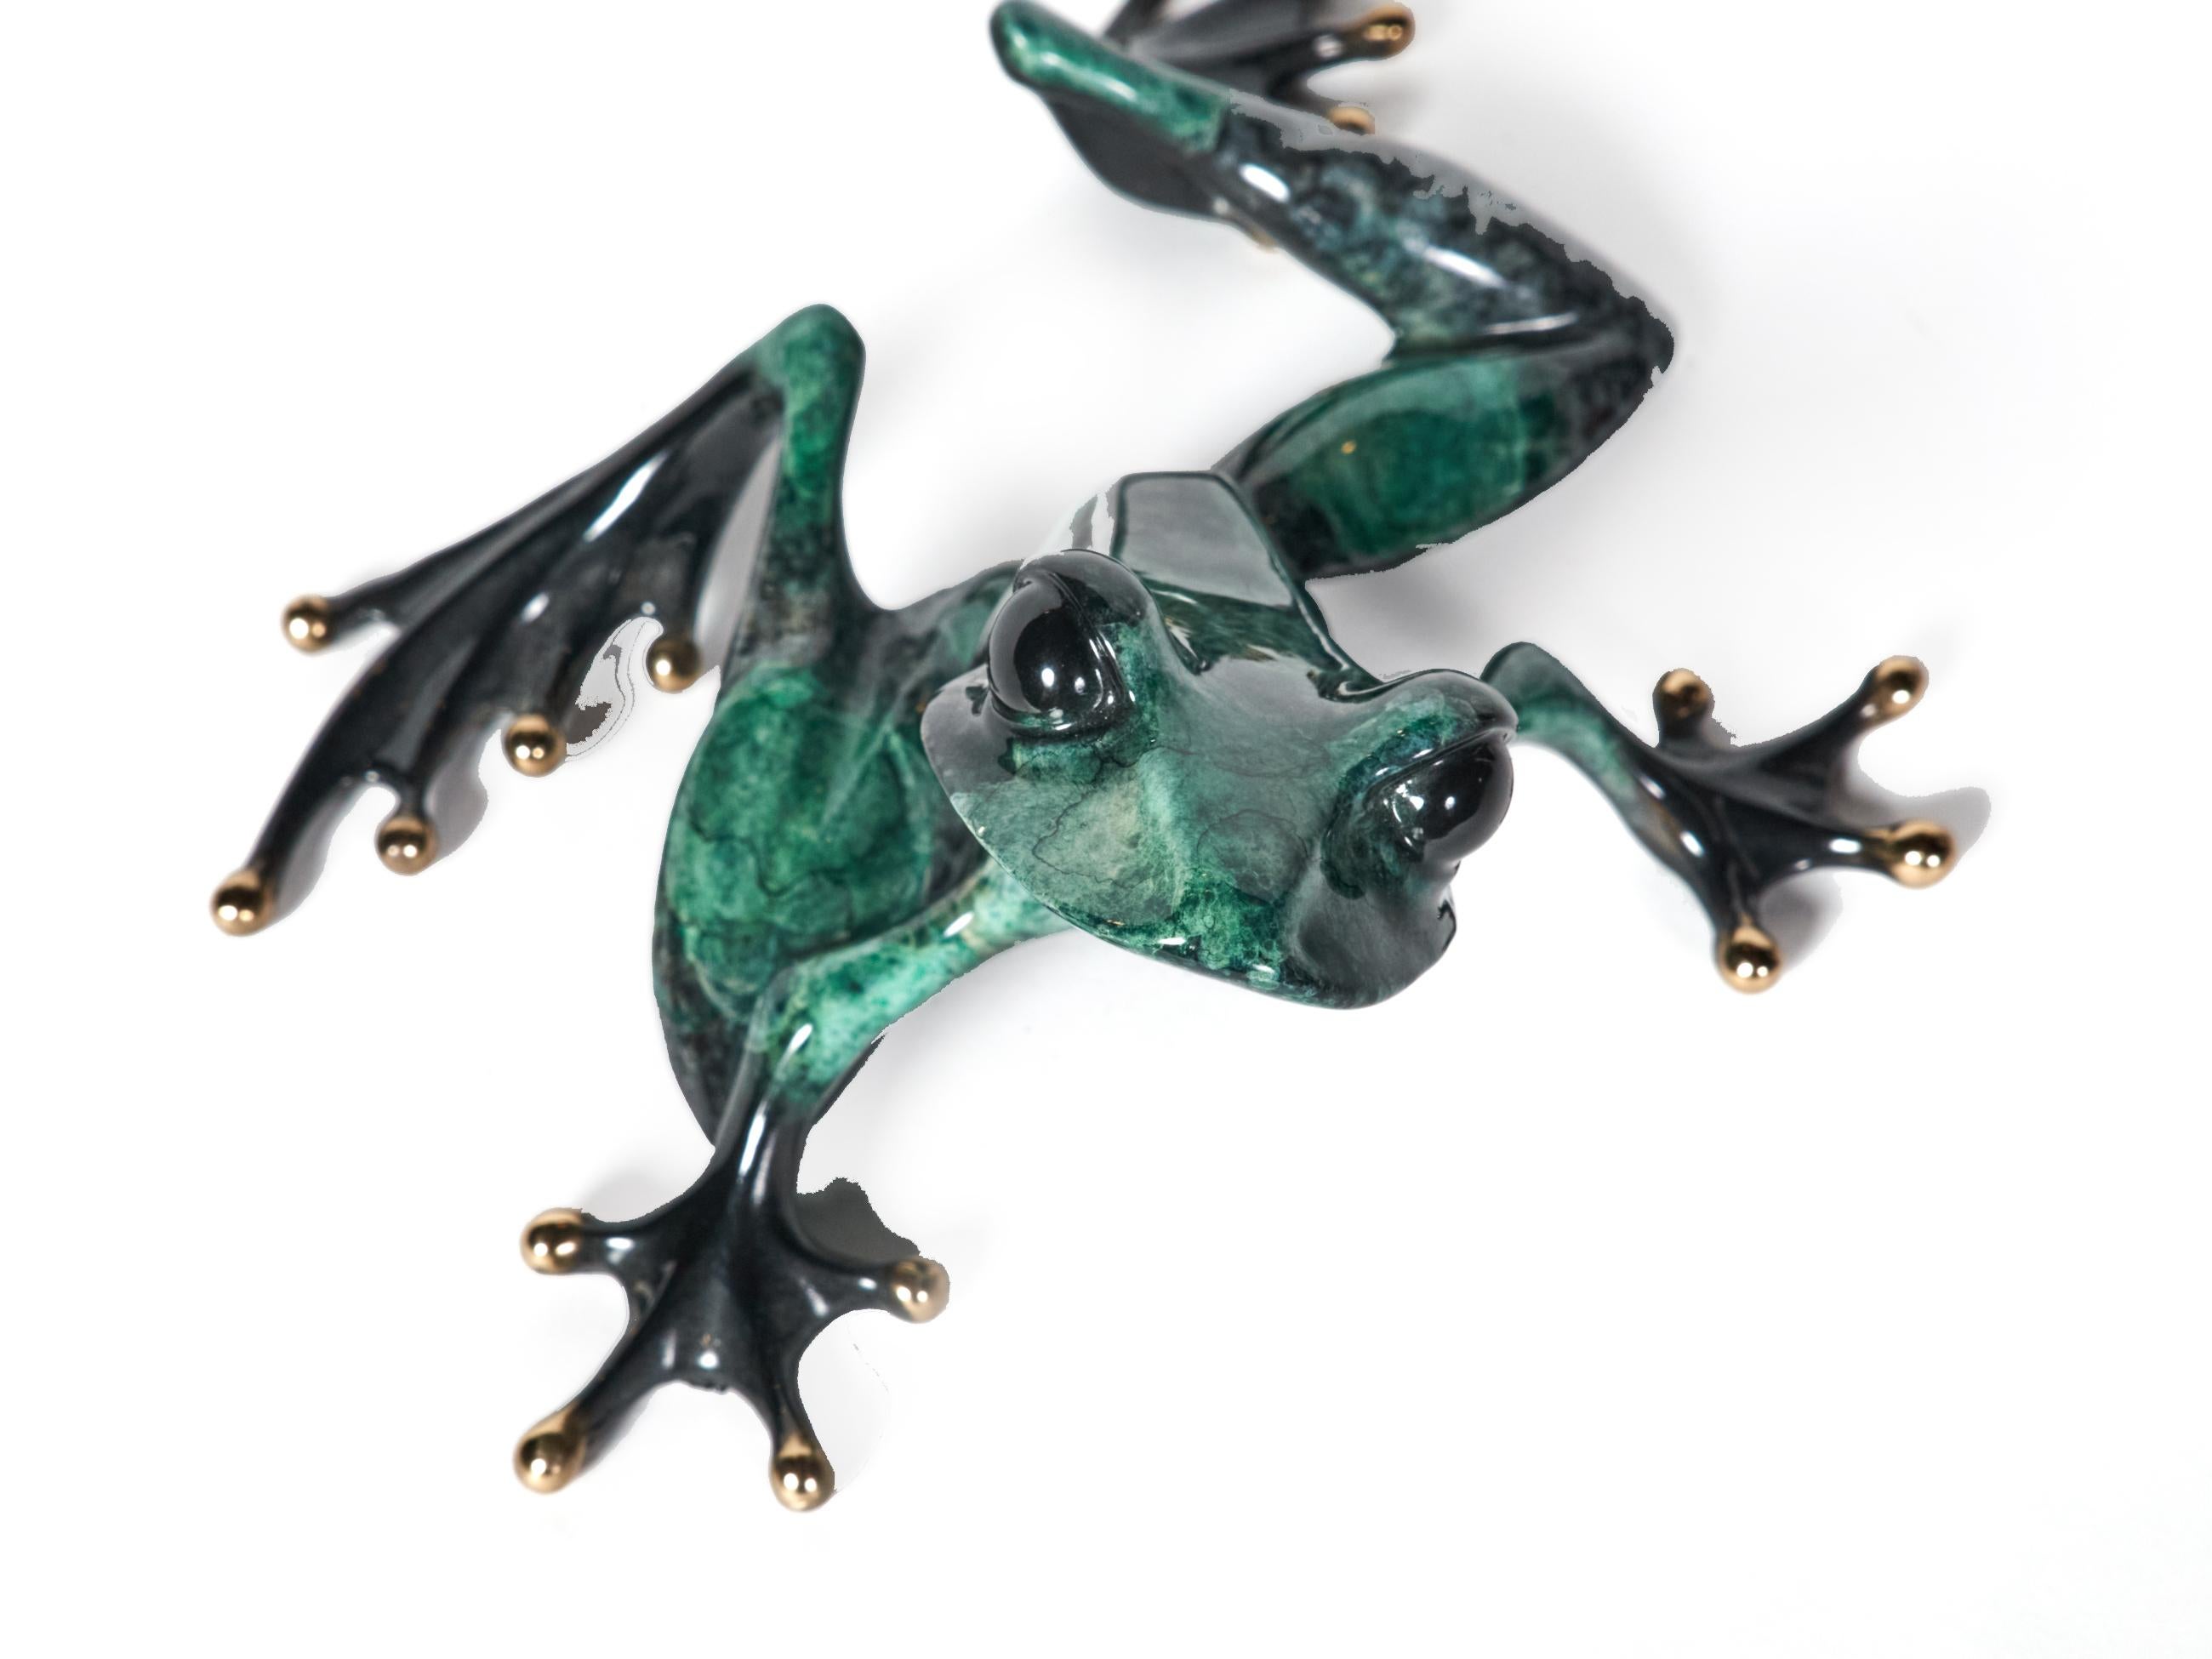 Beguiling limited edition bronze frog by highly collected Tim Cotterill. The Frogman . In excellent condition without issue or losses this guy will steel your heart. He has deep soulful eyes. Beautifully hand painted enamel in hues of green. Signed